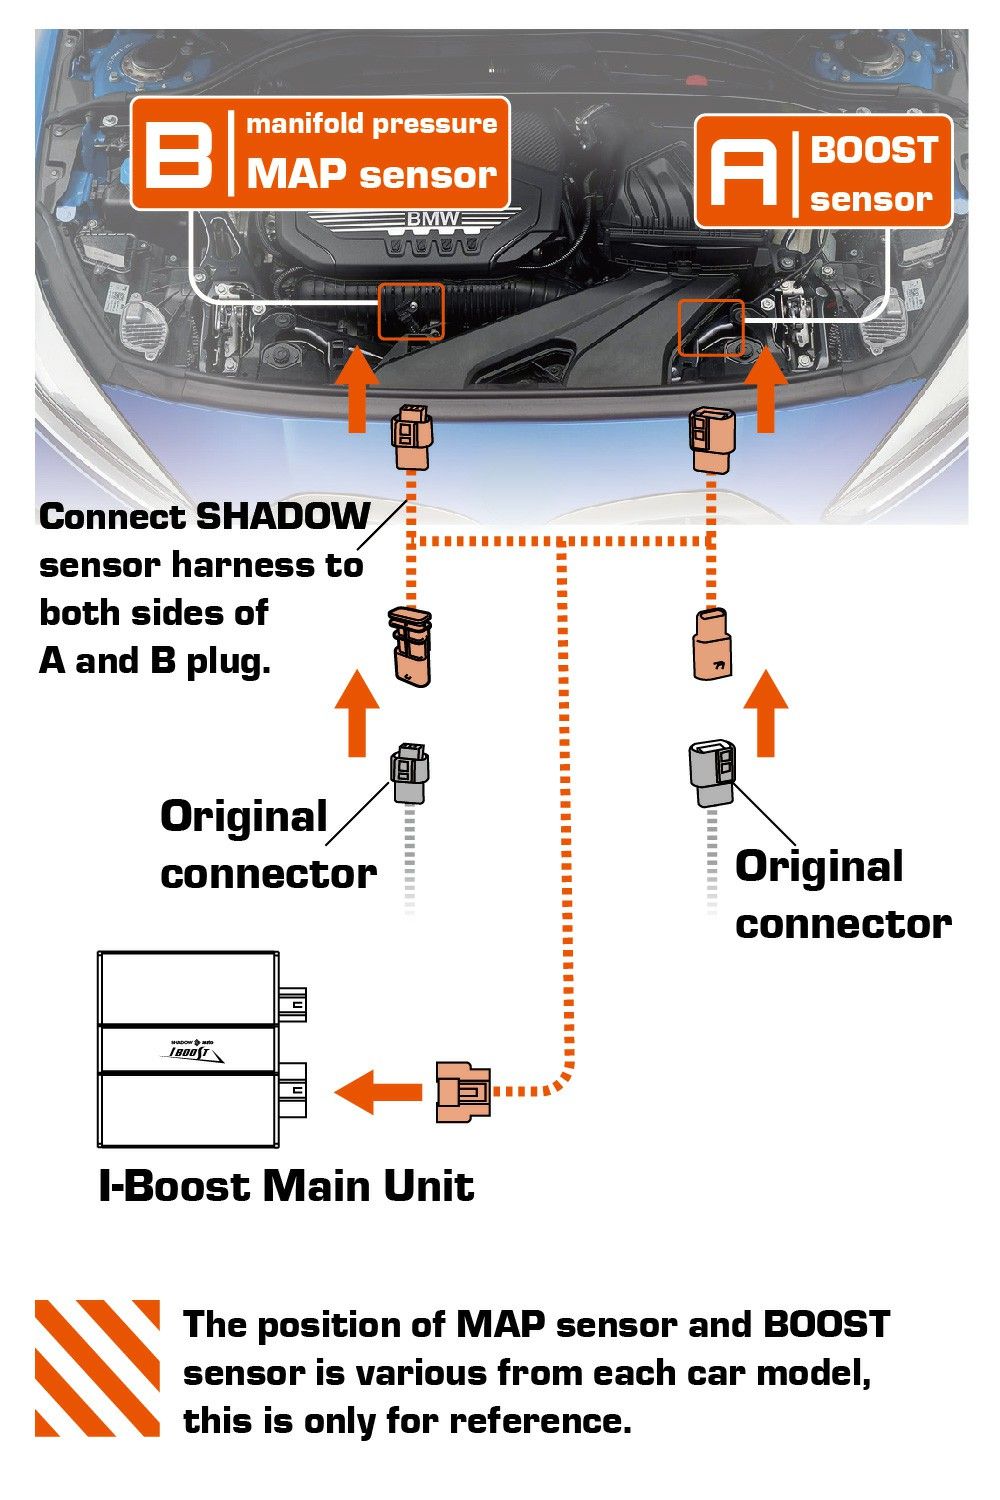 “The position of MAP sensor and BOOST sensor is various from each car model, this is only for reference.